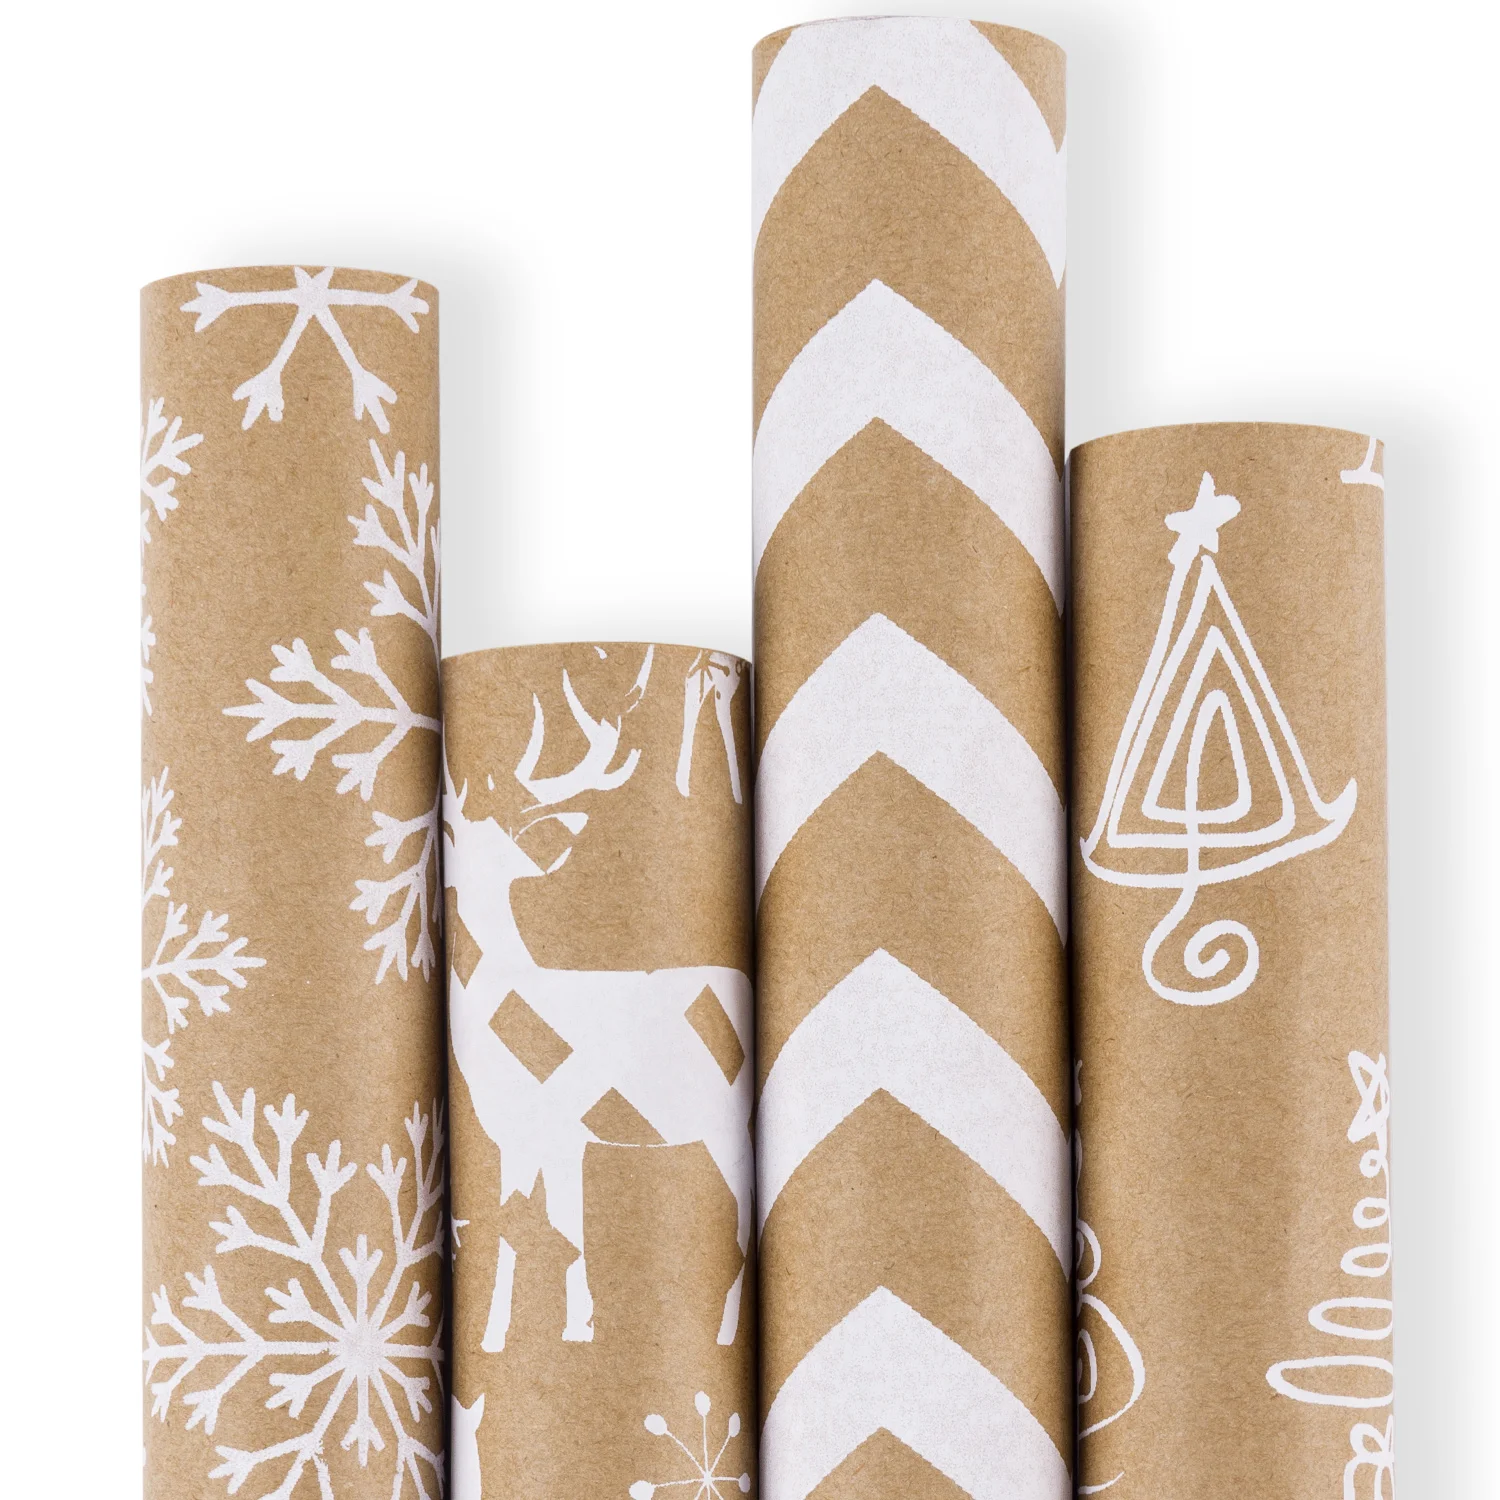 Christmas Cadeau Inpakpapier Custom Gift Wrap Paper Rolls Winter Drop Shipping Wrapping Paper 30 Inch 10 Feet - Buy Wholesale Custom Wrapping Paper,Paper For Gift Wrapping Paper,Xmas Wrapping Paper Product on